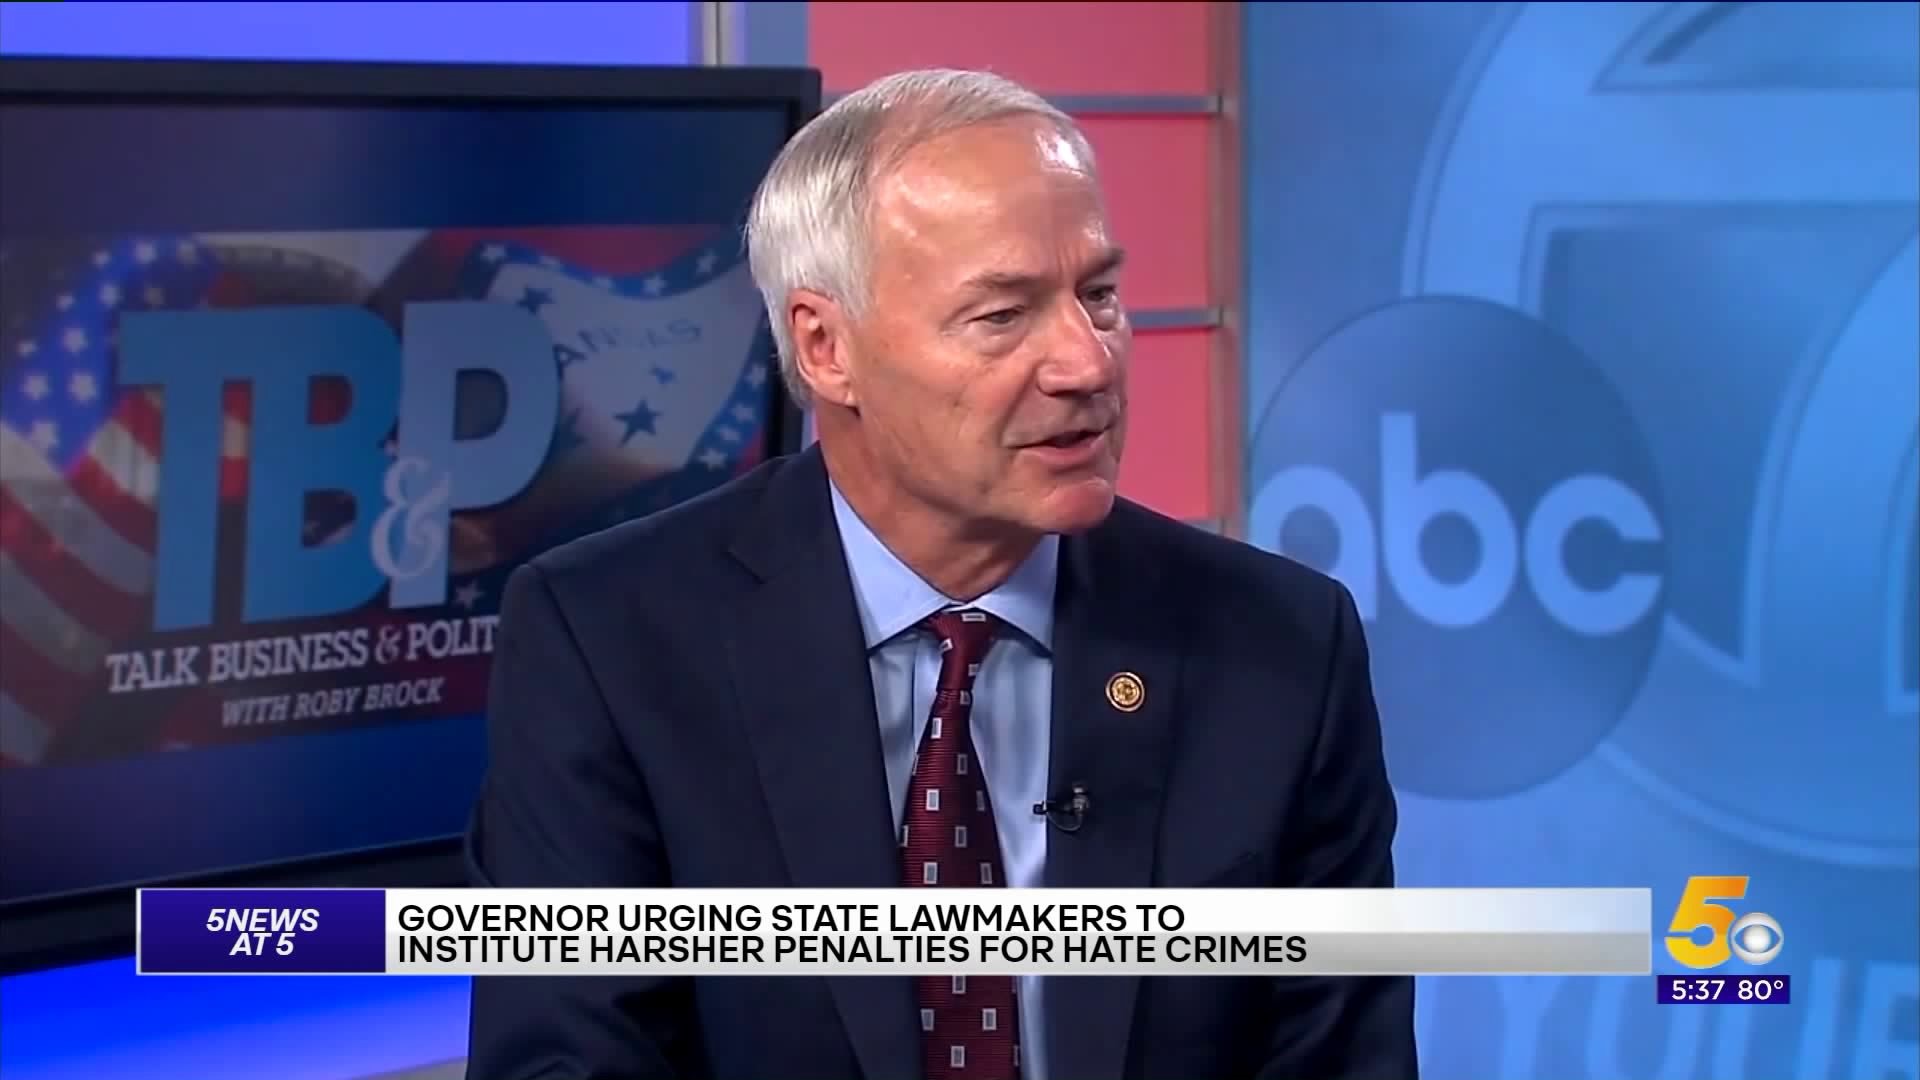 Gov. Hutchinson Says Gun Control Legislation `Not The Right Solution` To Hate Crimes, Mass Shootings